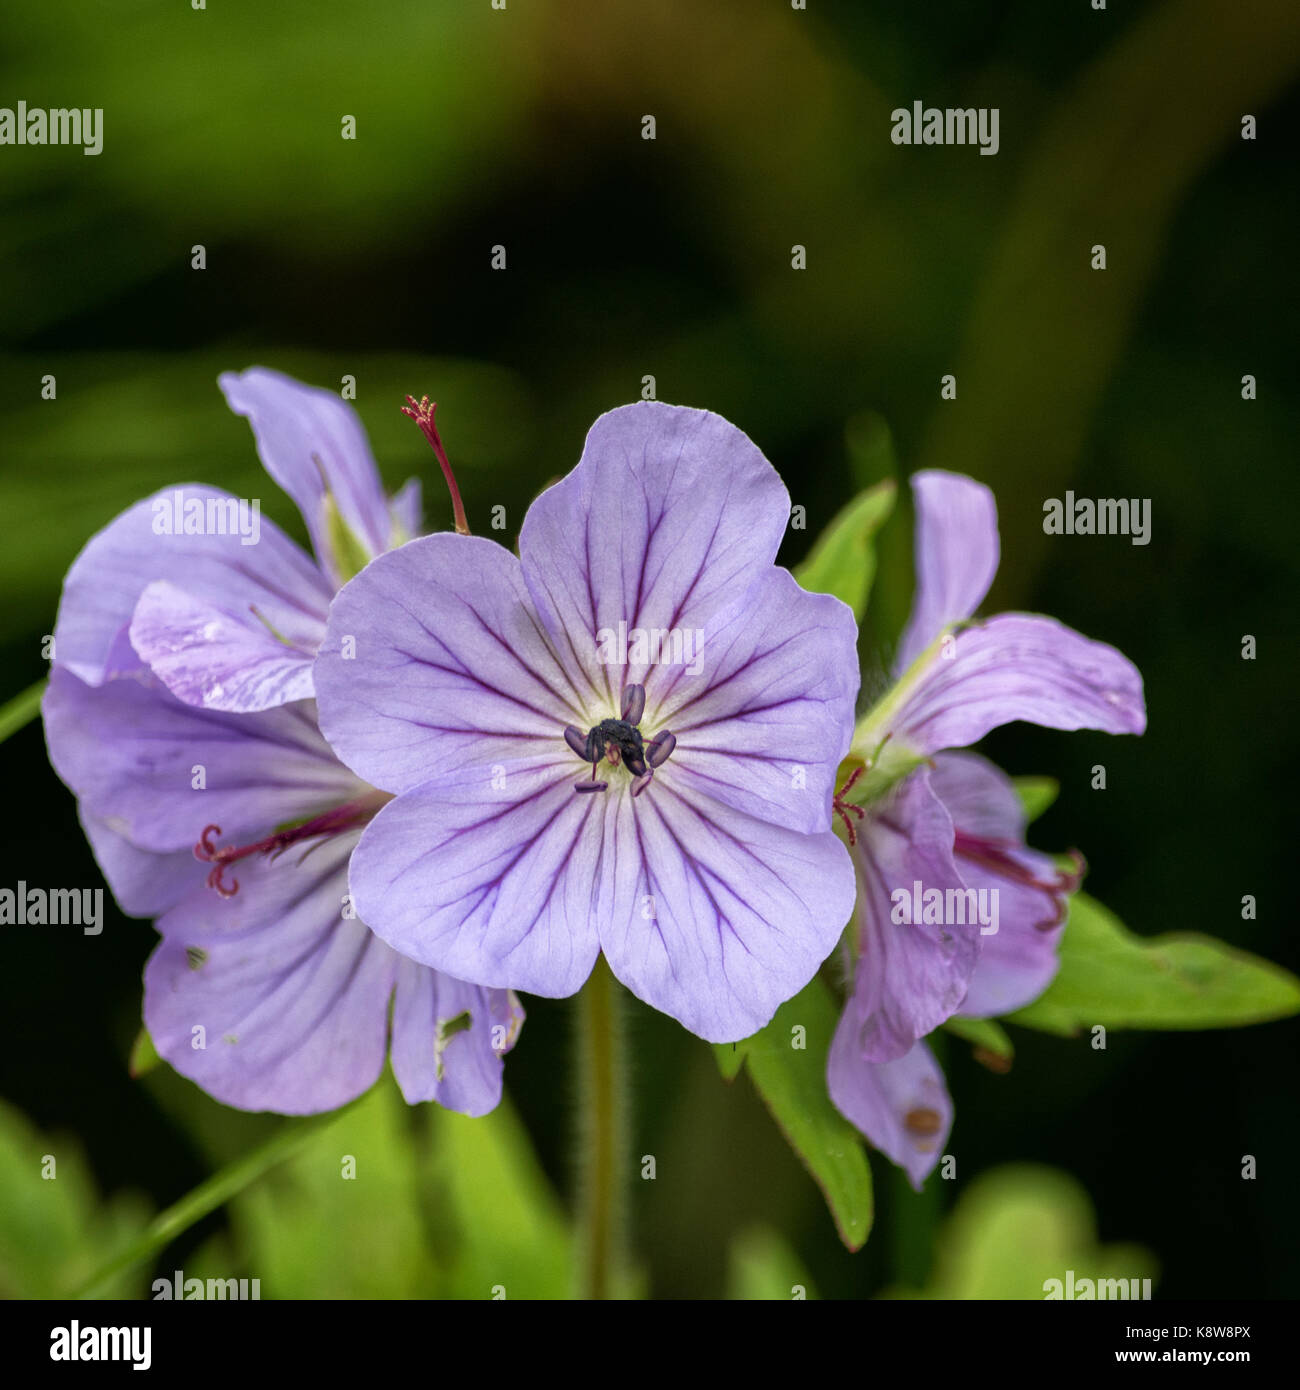 A wild Geranium using the power of spring opens a veined purple flower. Stock Photo